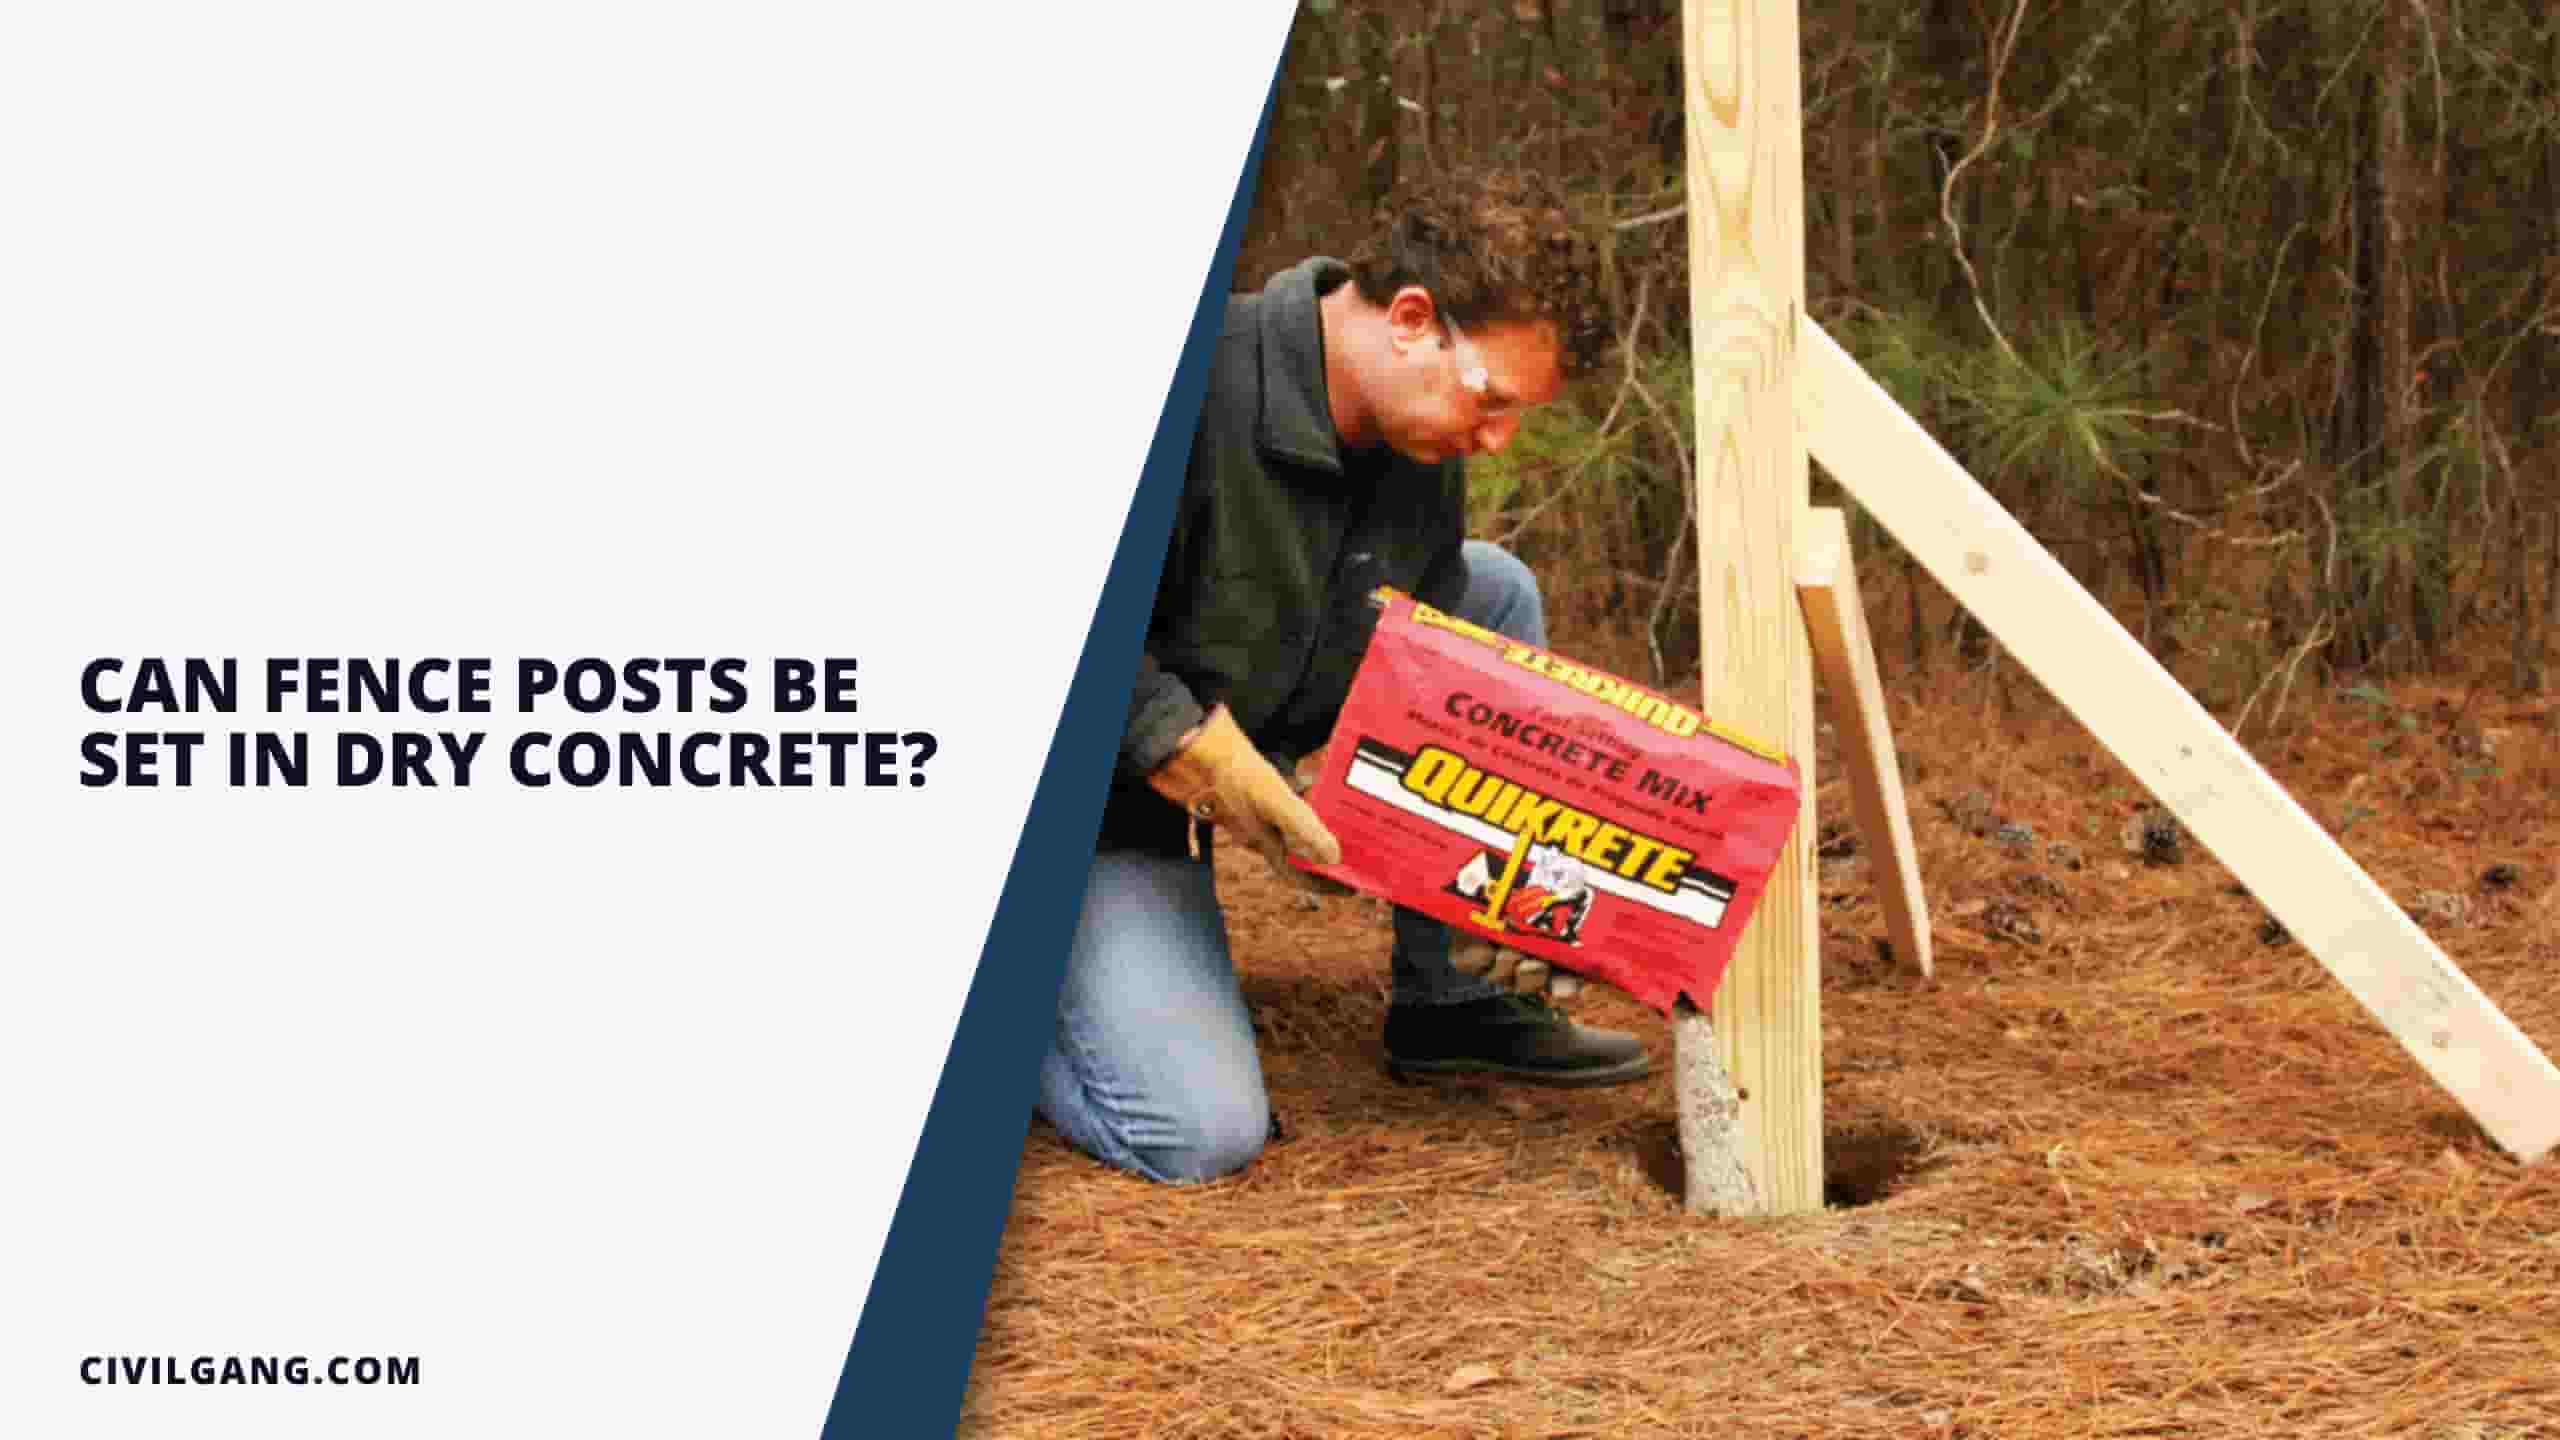 Can Fence Posts Be Set In Dry Concrete?